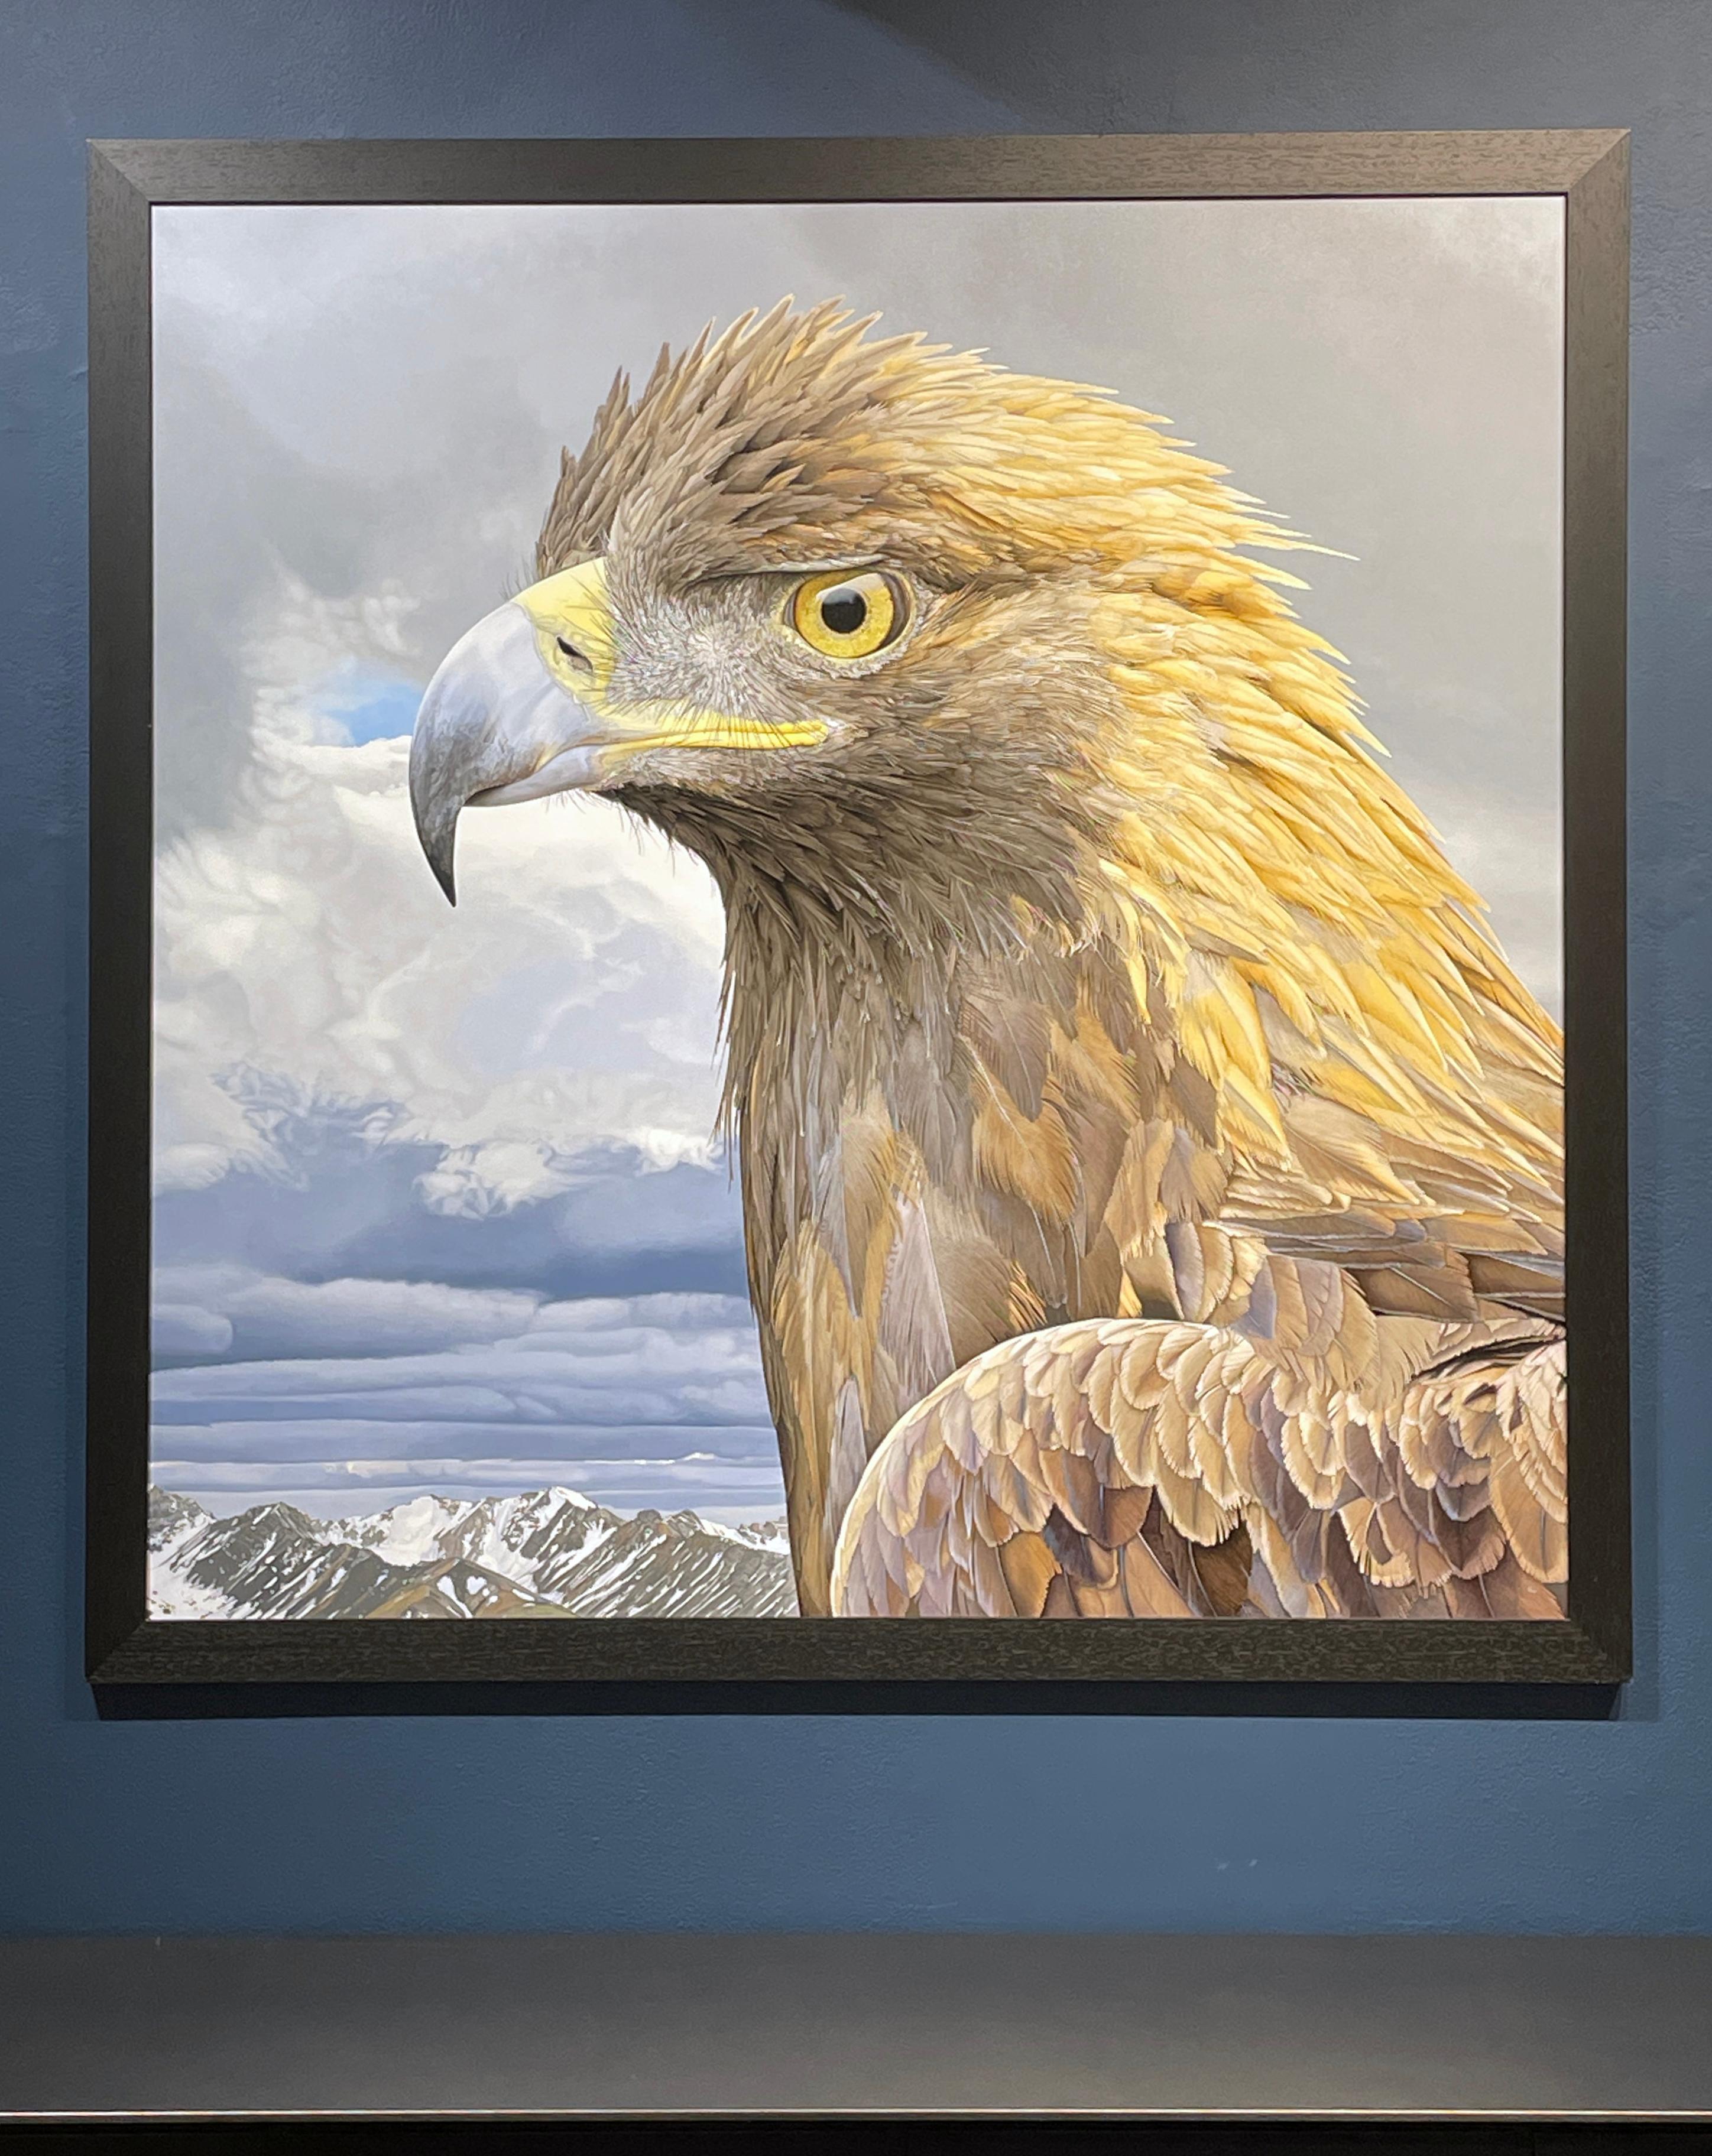 Set against the Polychrome Pass in Denali National Park in Alaska, this majestic female Golden eagle is painted in a traditional portrait style often reserved for military personnel.  Artist Rick Pas turns this tradition onto birds of prey with